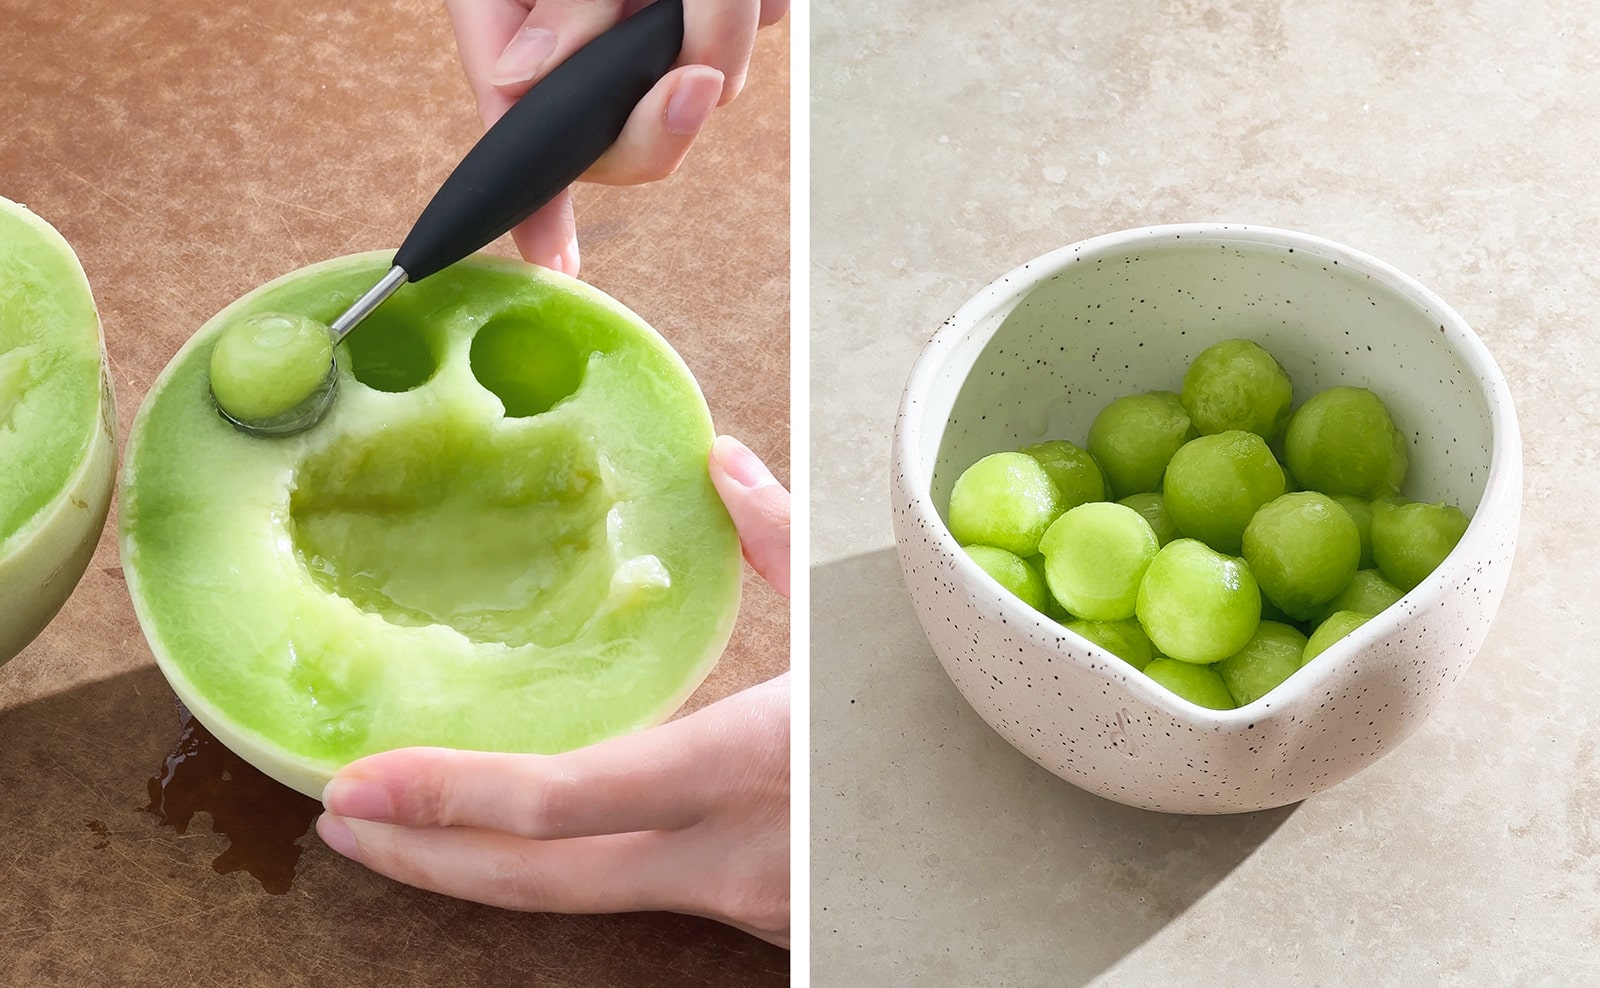 Left to right: scooping out melon balls from a honeydew, a bowl of honeydew balls.